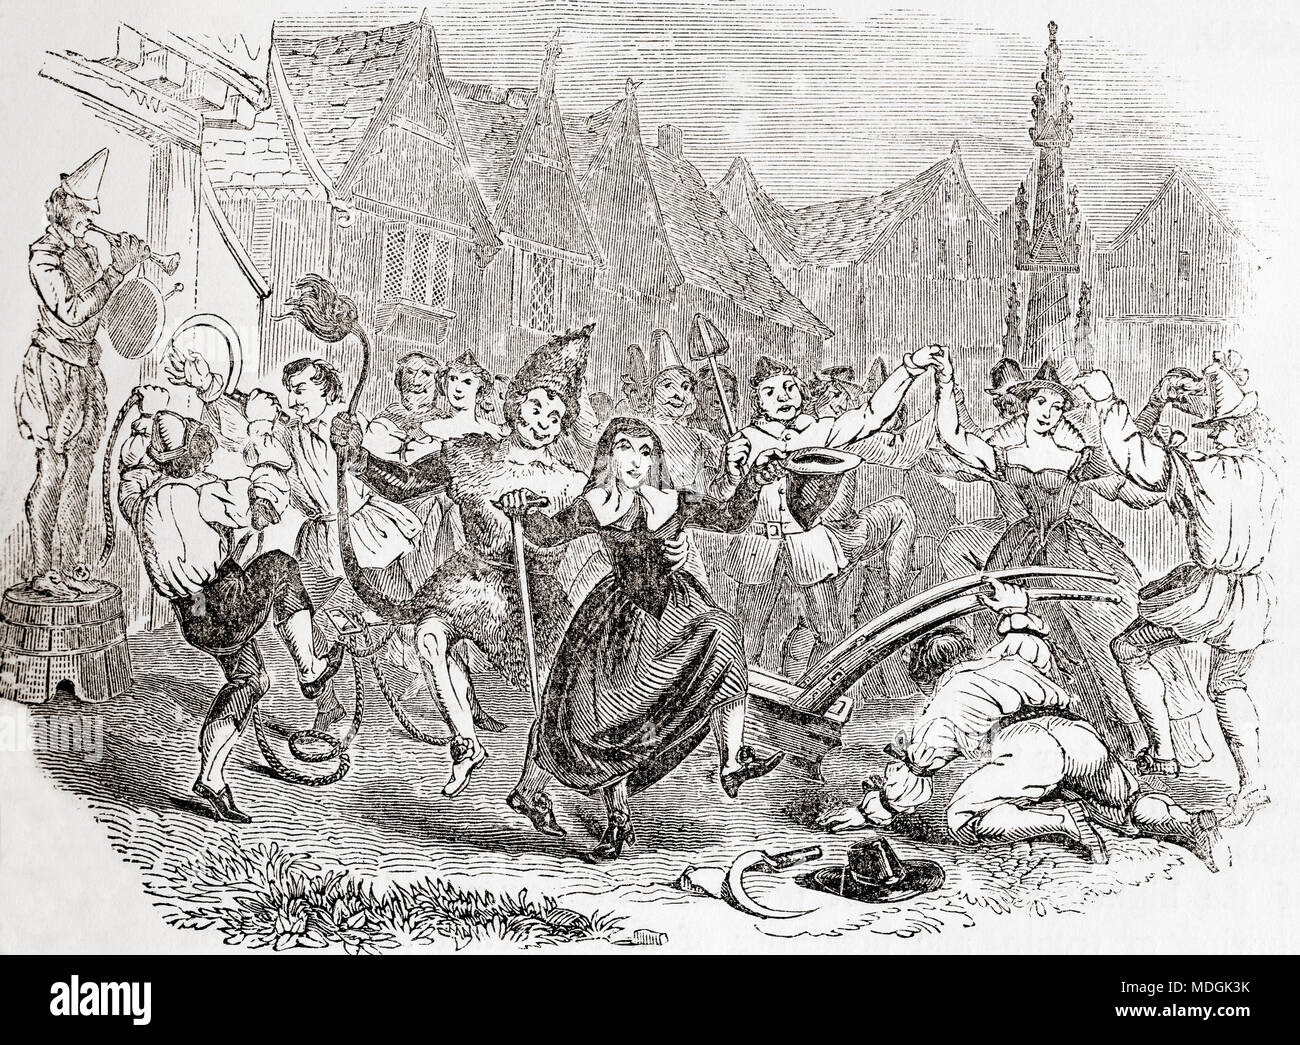 Plough Monday celebrations, the dance of Bessie and the Clown.  Plough Monday celebrated the start of the ploughing season after Christmas. Ploughboys took a decorated plough around the village, begging for money, food or drink.  From Old England: A Pictorial Museum, published 1847. Stock Photo